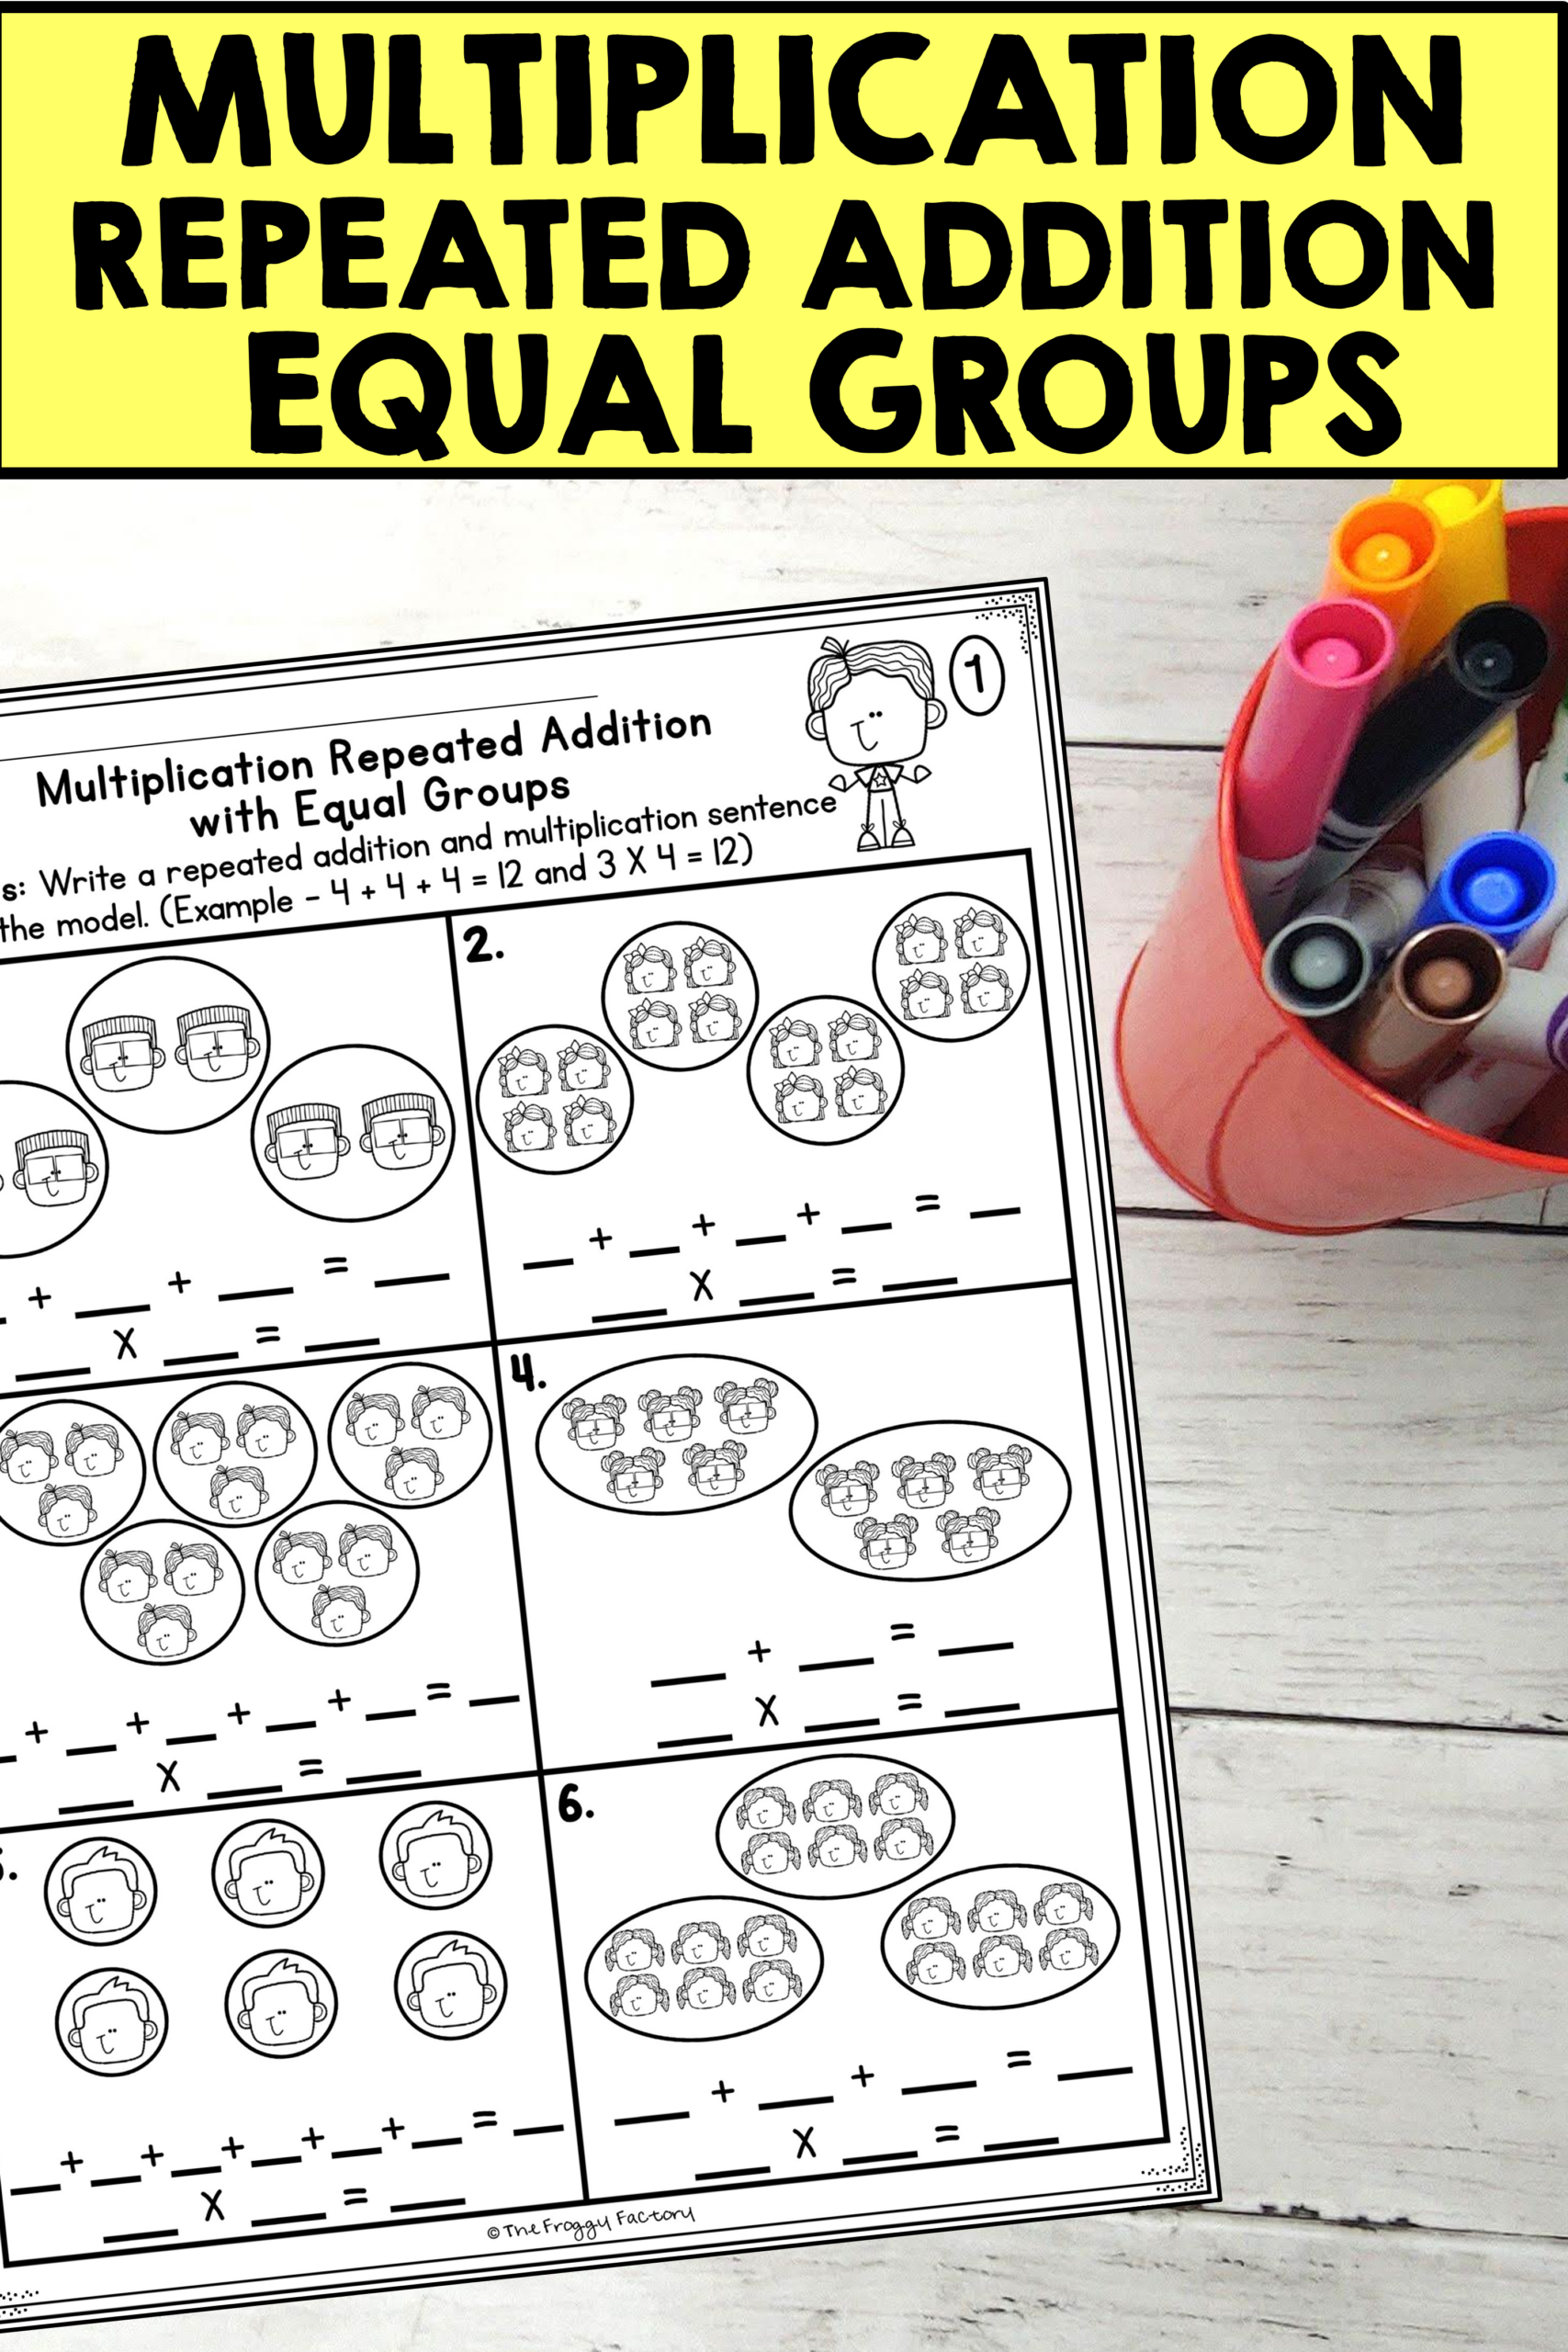 Multiplication Repeated Addition Equal Groups Worksheets in Multiplication Worksheets Equal Groups